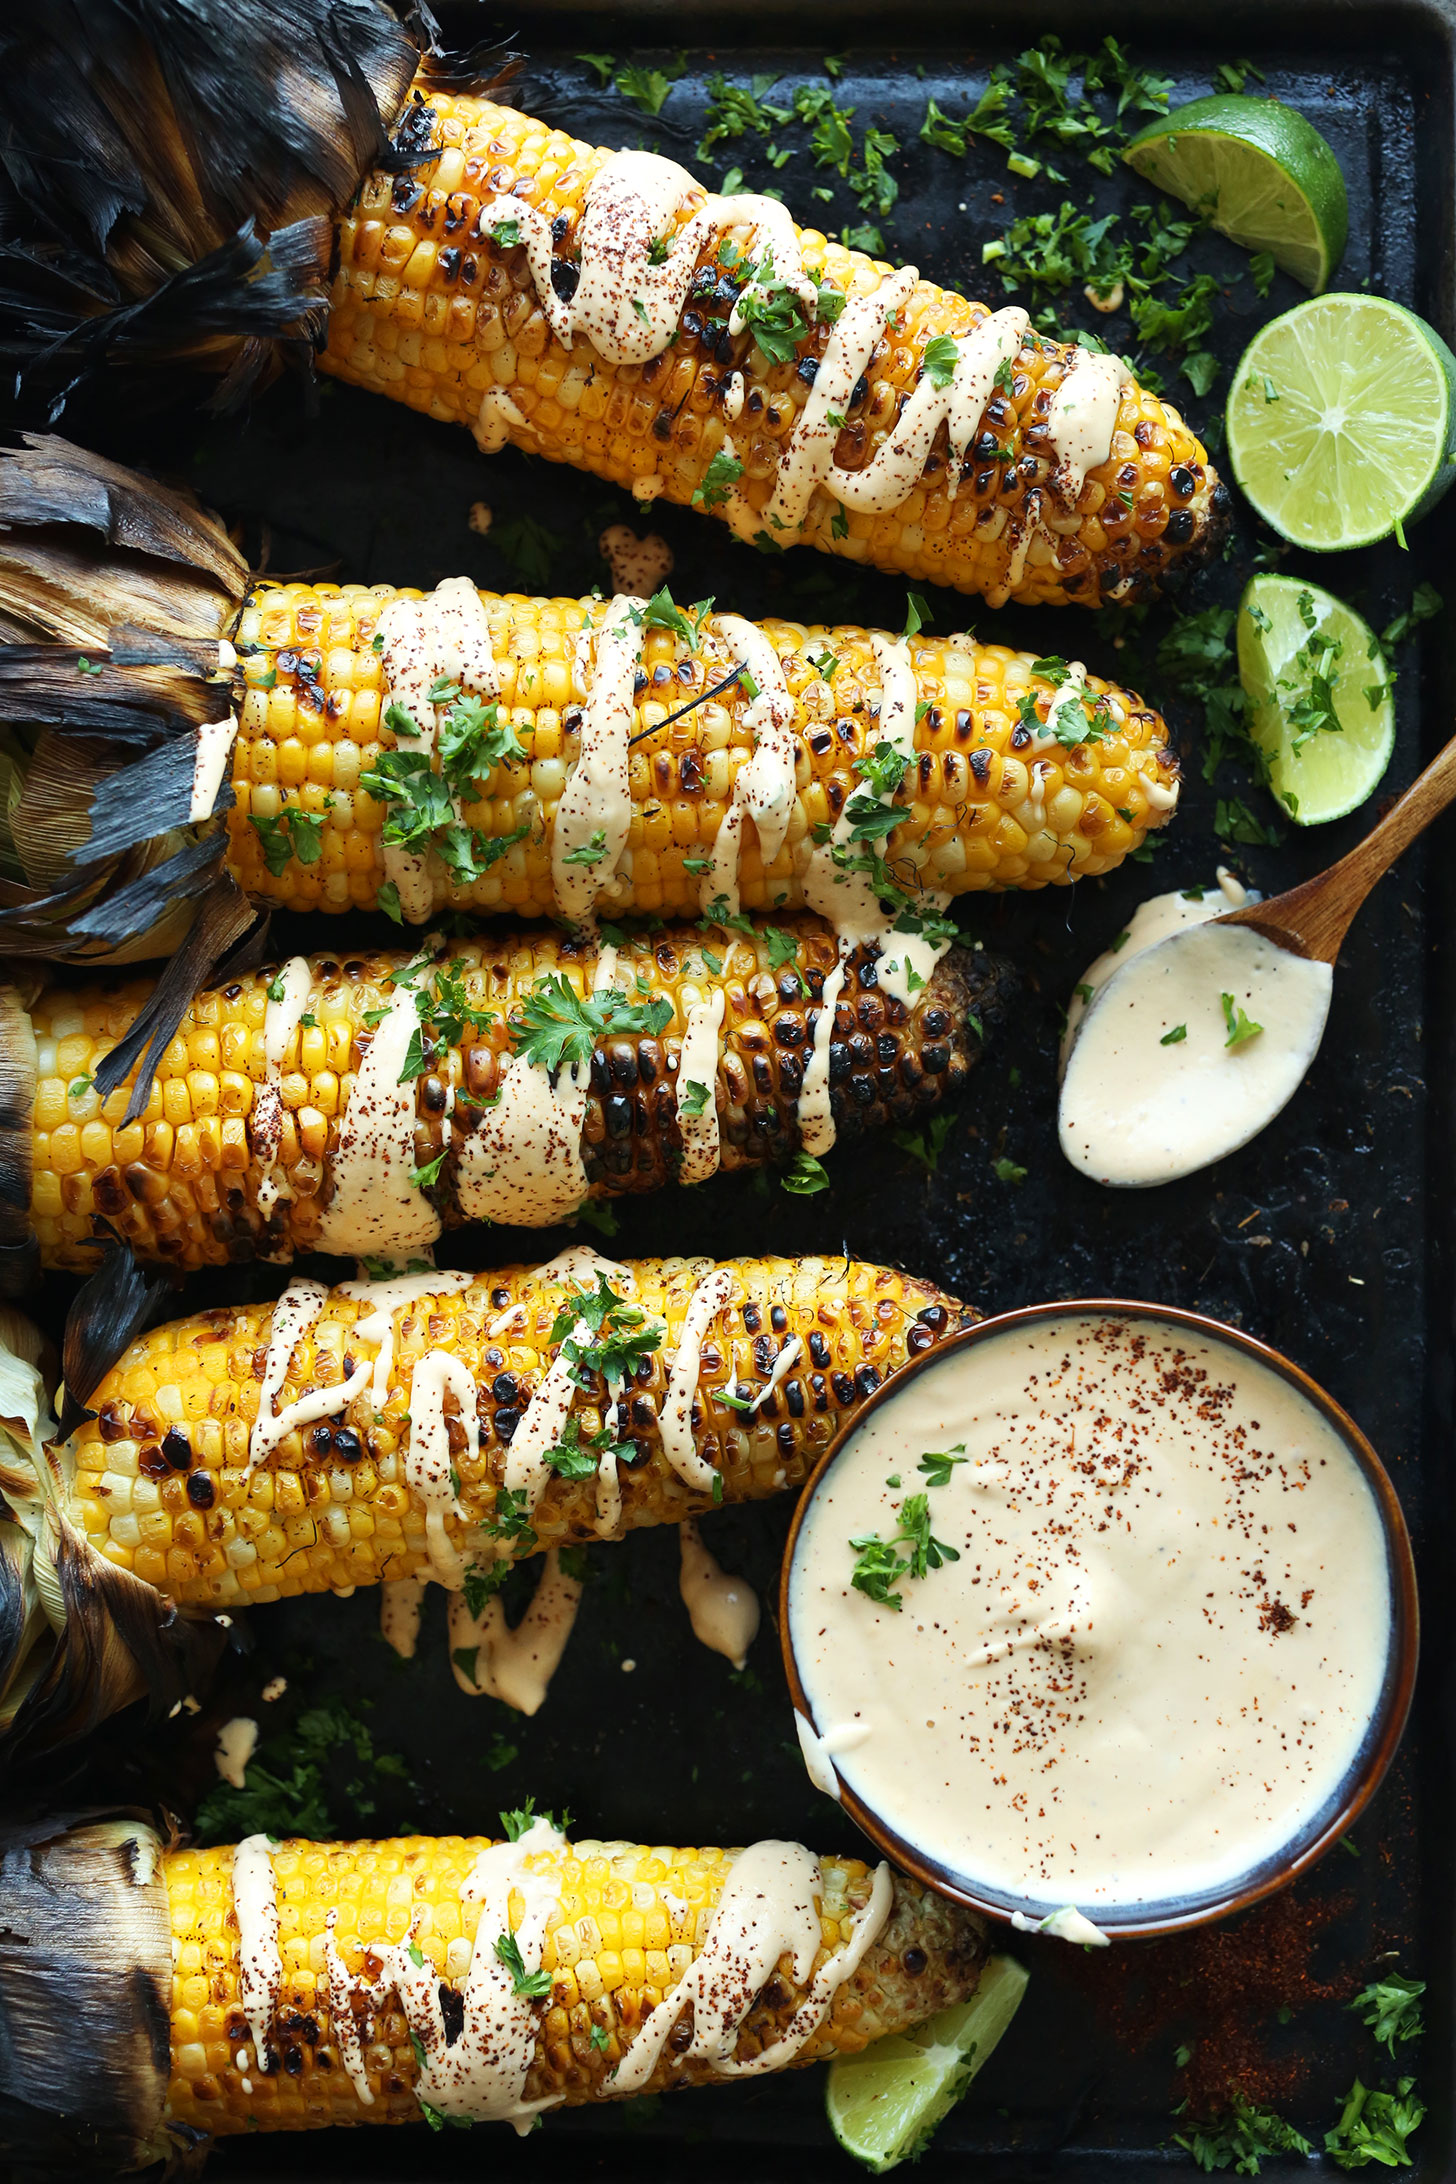 Baking sheet of grilled corn cobs with vegan aioli